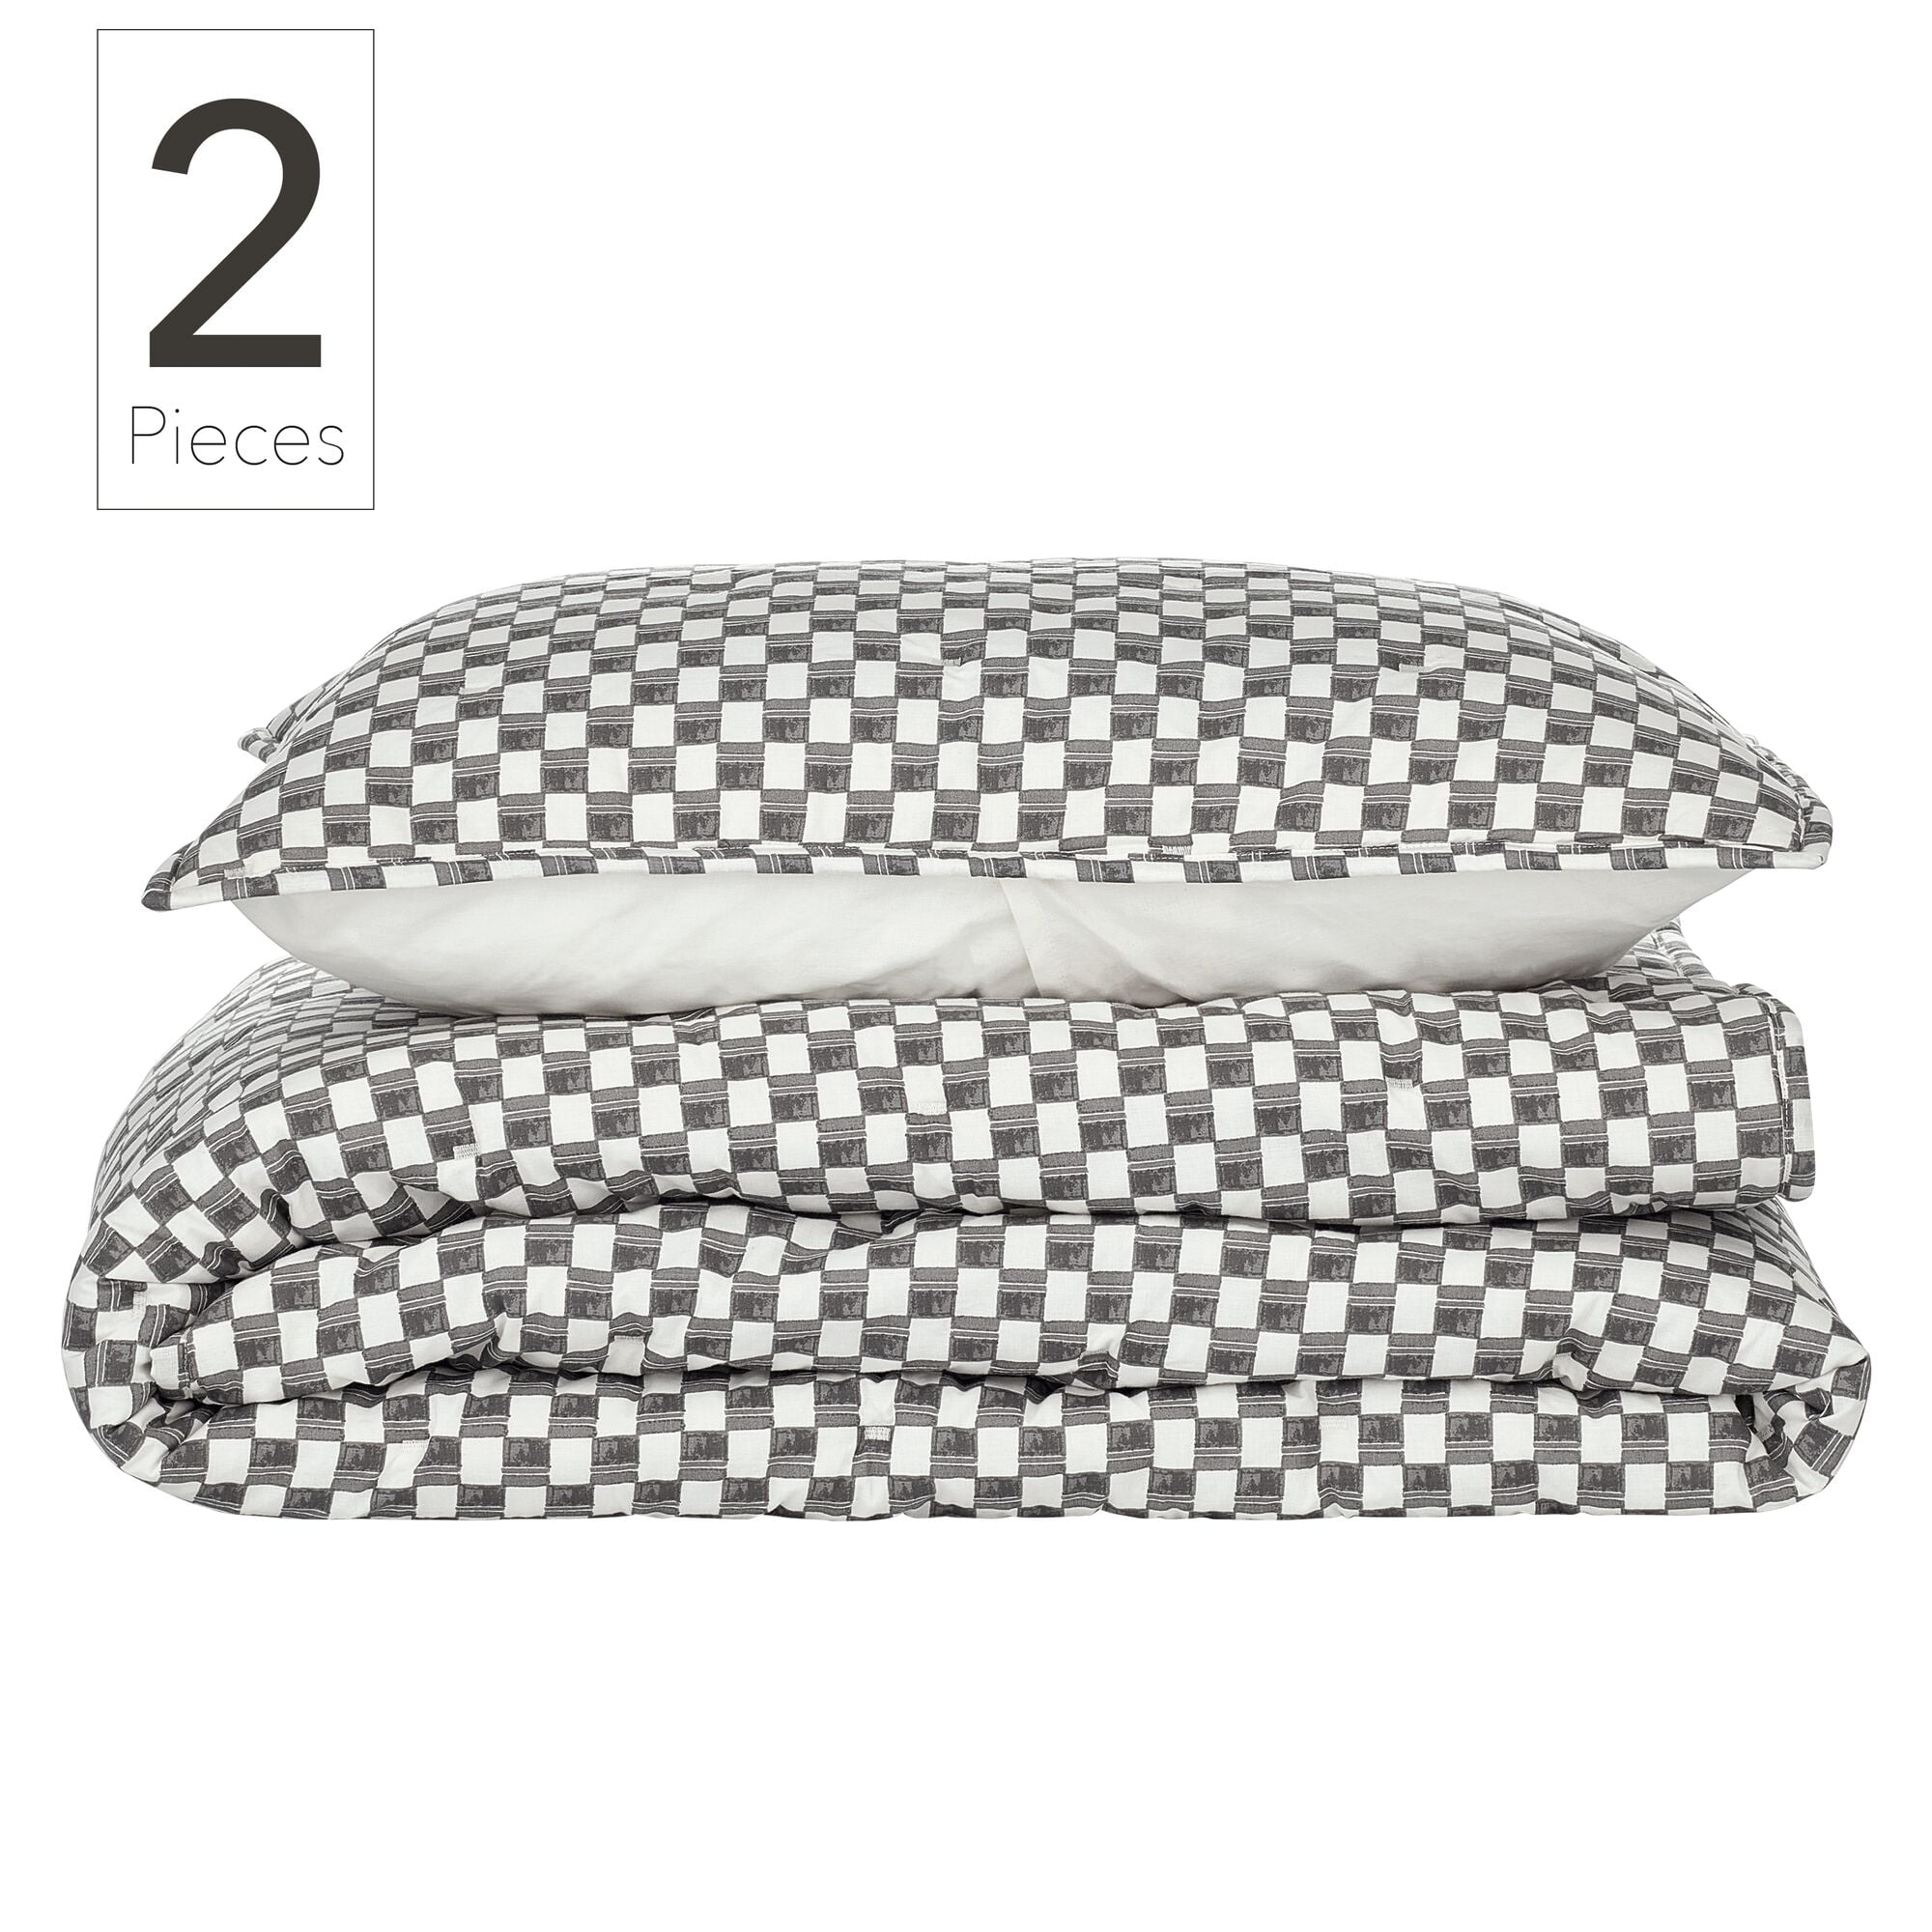 Nate Home by Nate Berkus Signature Collection Rough Lines Quilt Set